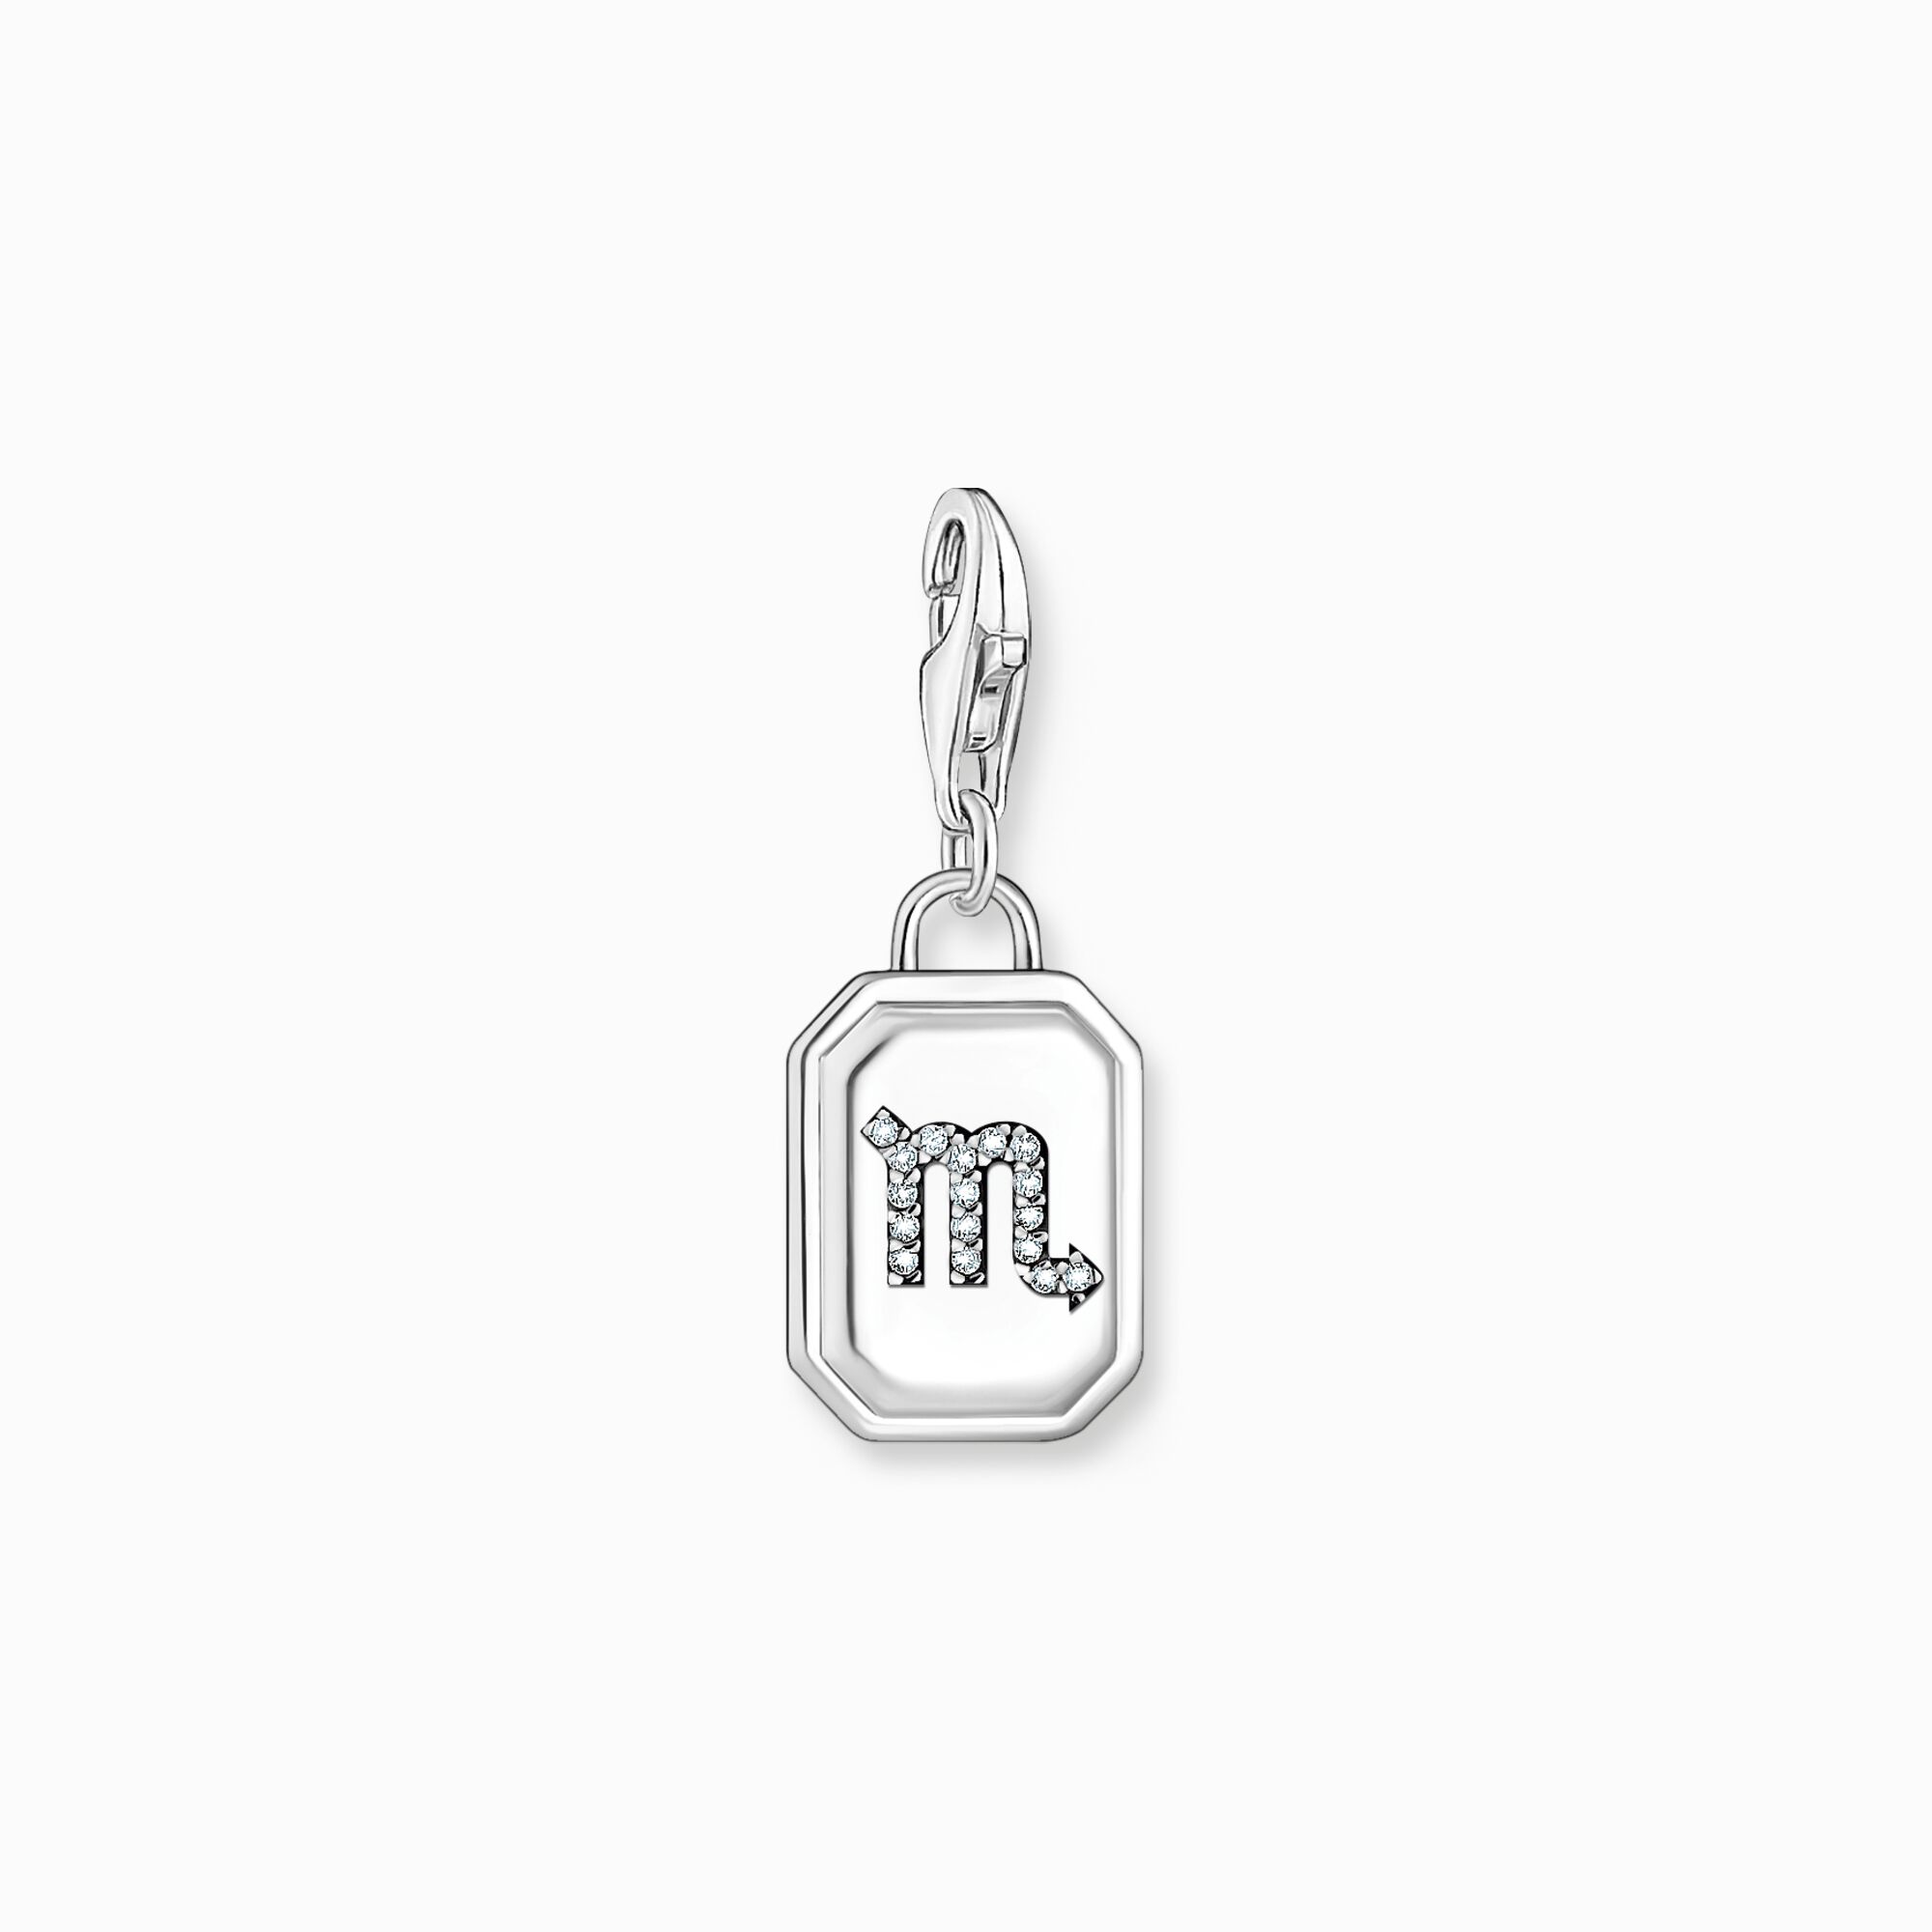 Silver charm pendant zodiac sign Scorpio with zirconia from the Charm Club collection in the THOMAS SABO online store